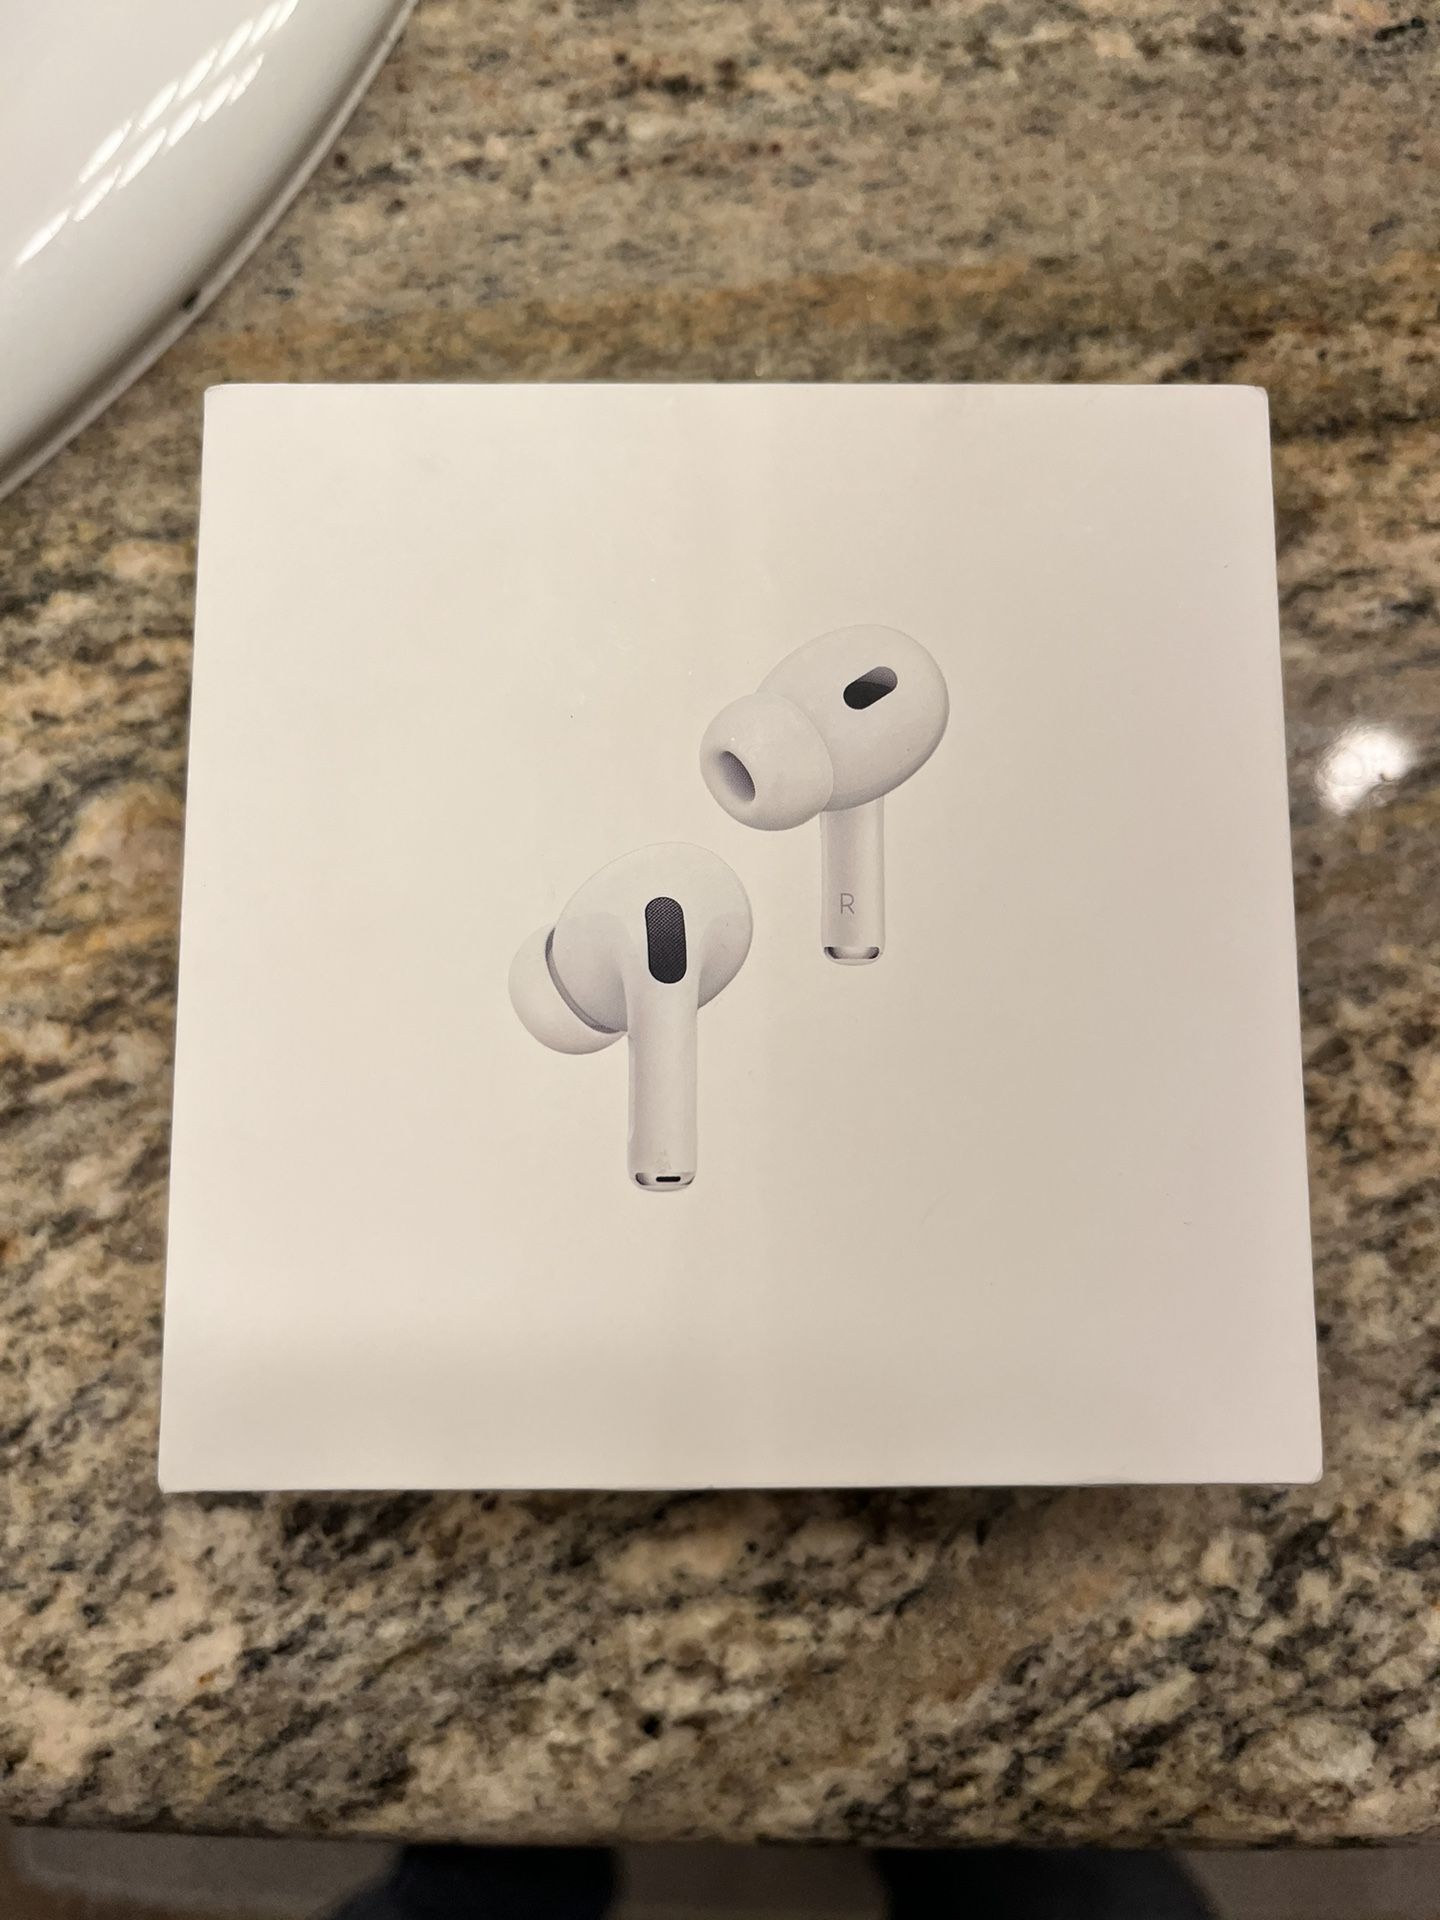 Air Pods Pro (2nd Generation) $180